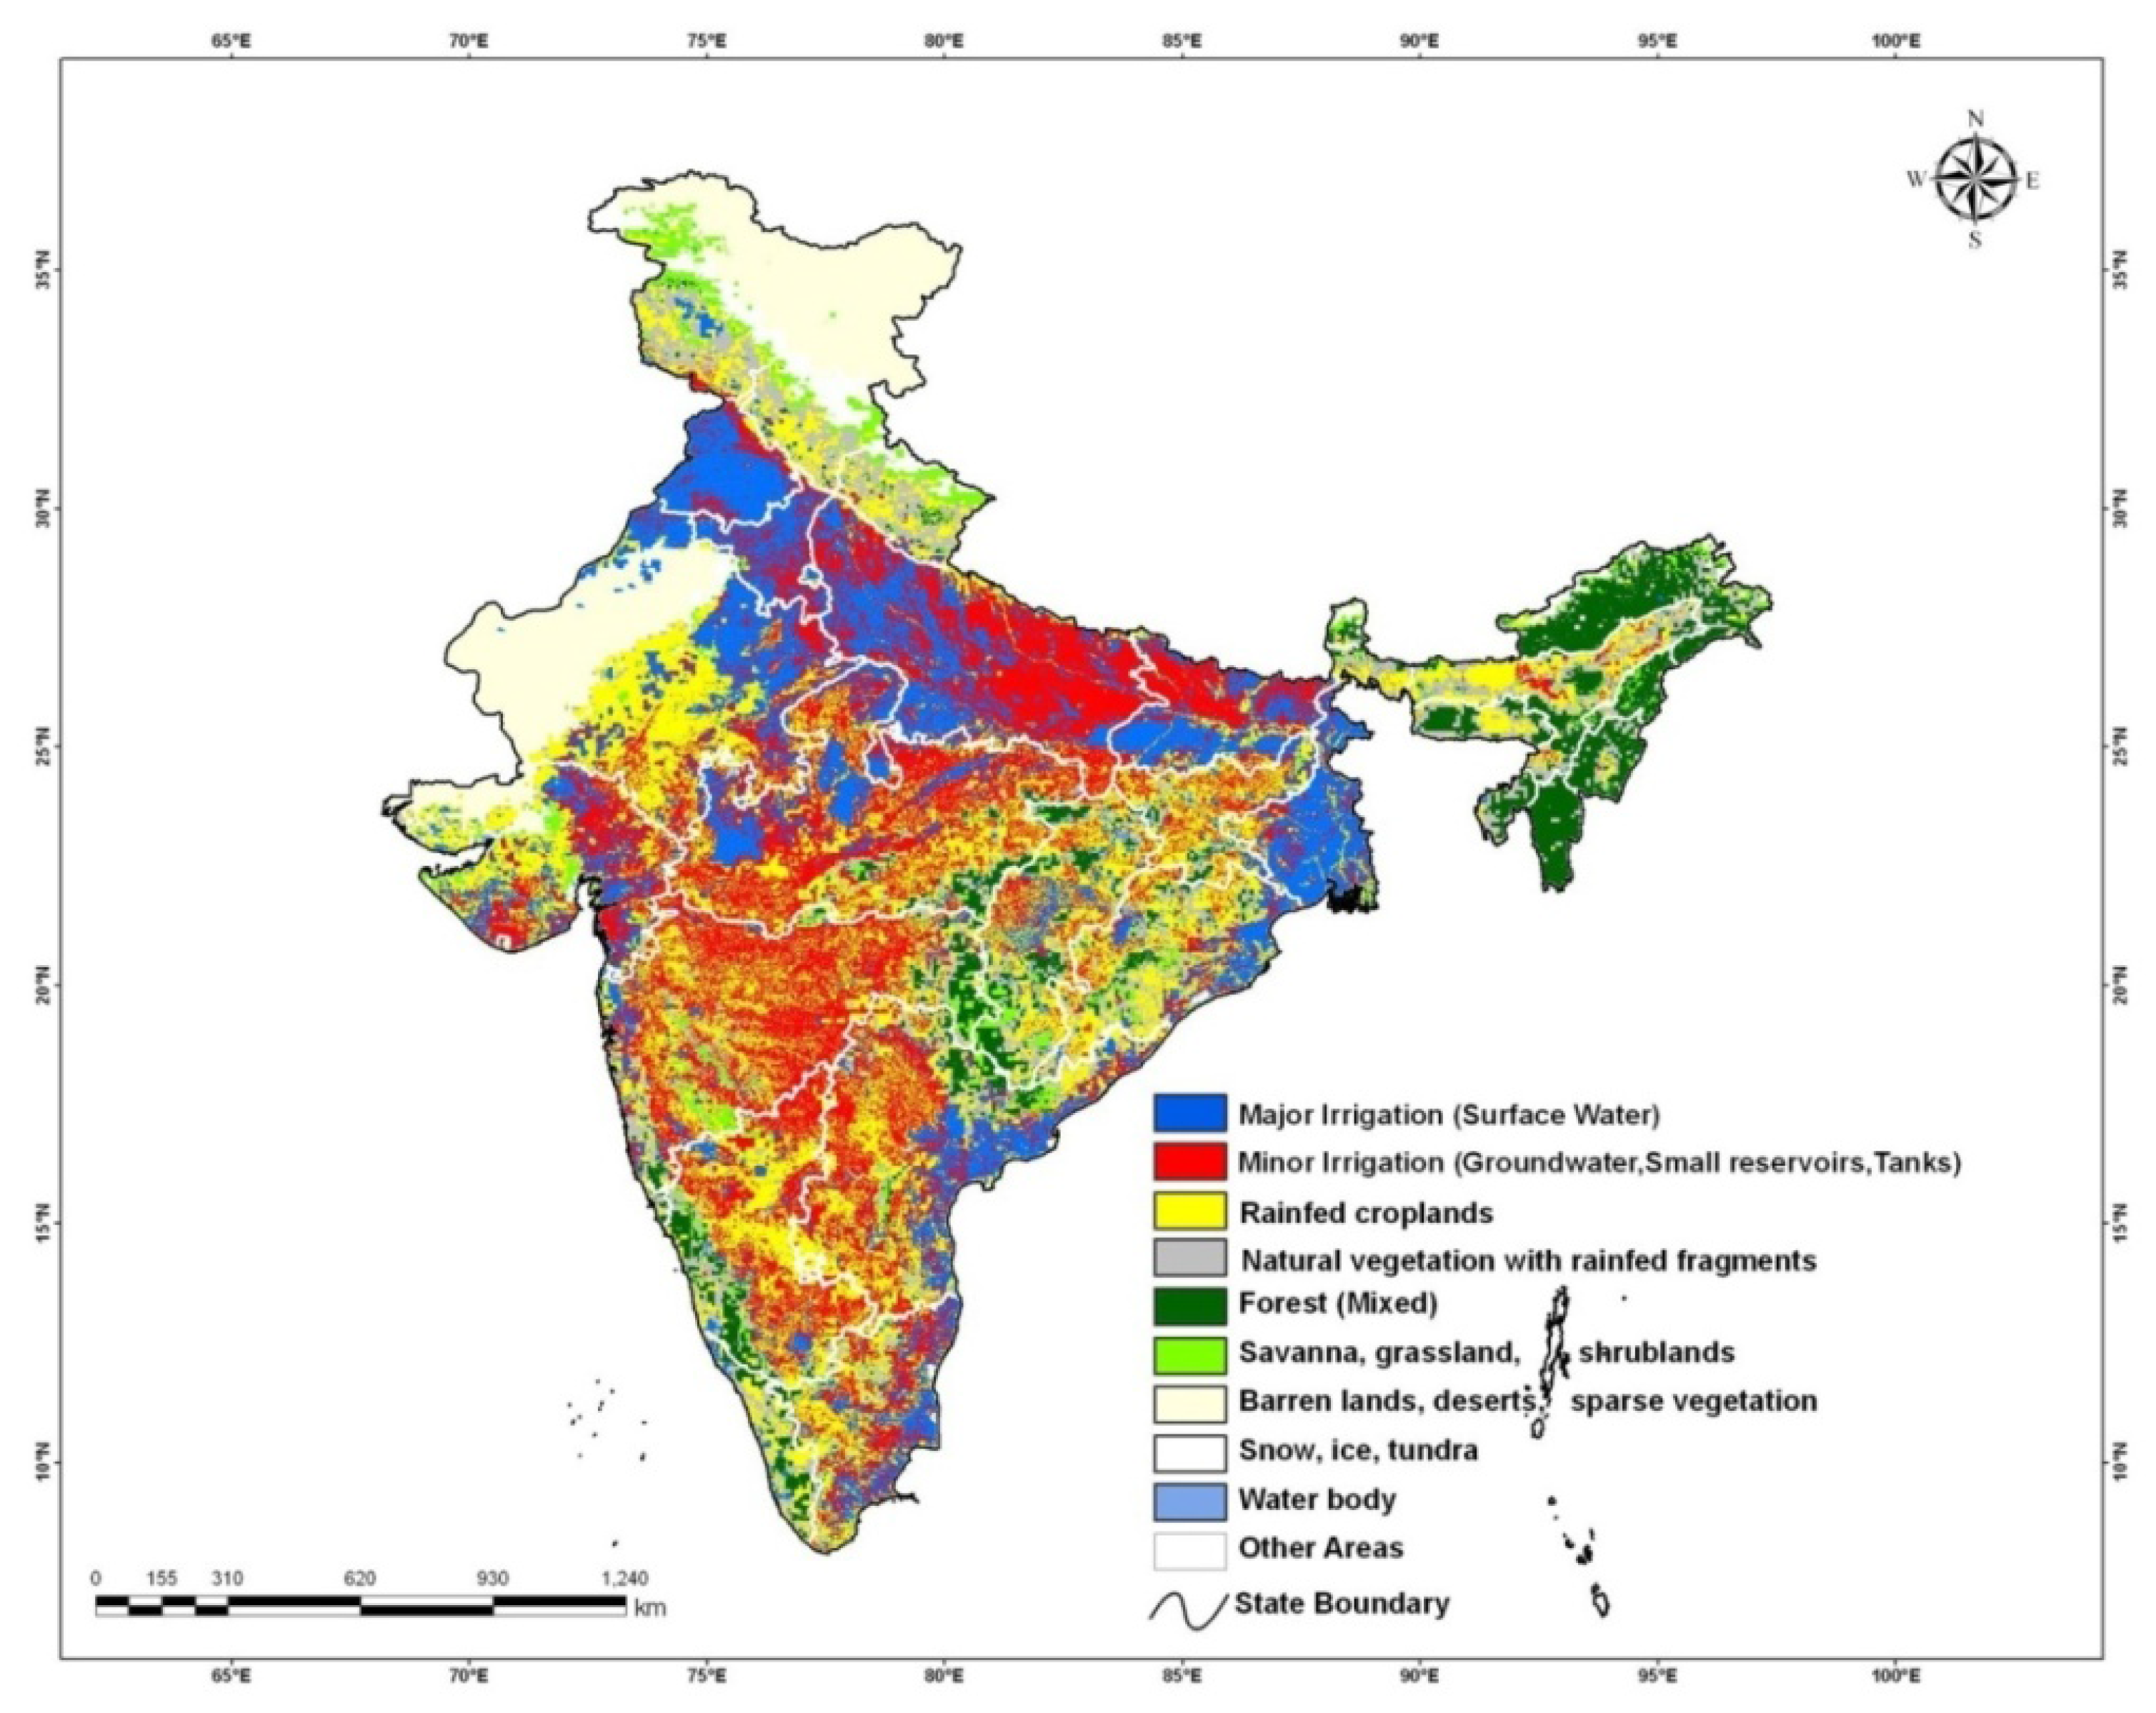 Remote Sensing | Free Full-Text | Irrigated Area Maps and Statistics of